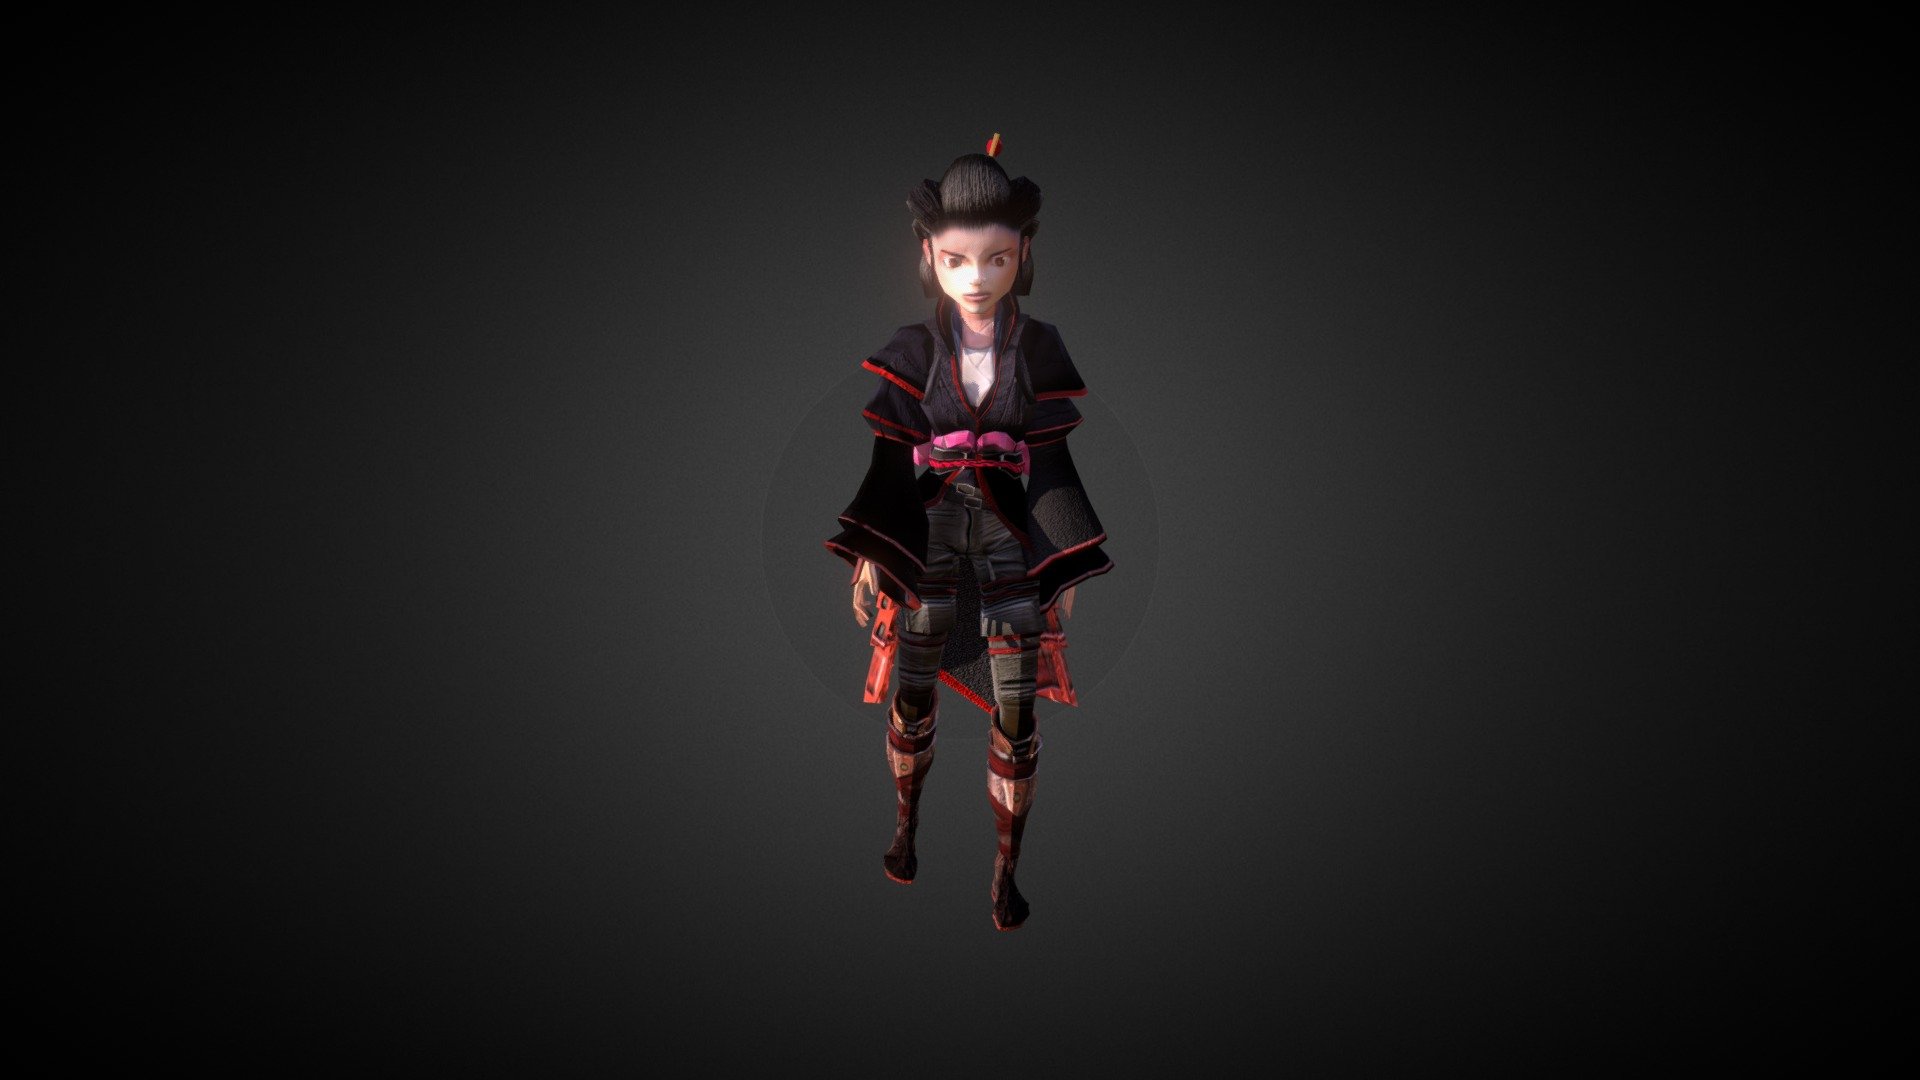 3D model of a character for videogames - The Asian Girl - 3D model by thonygm 3d model